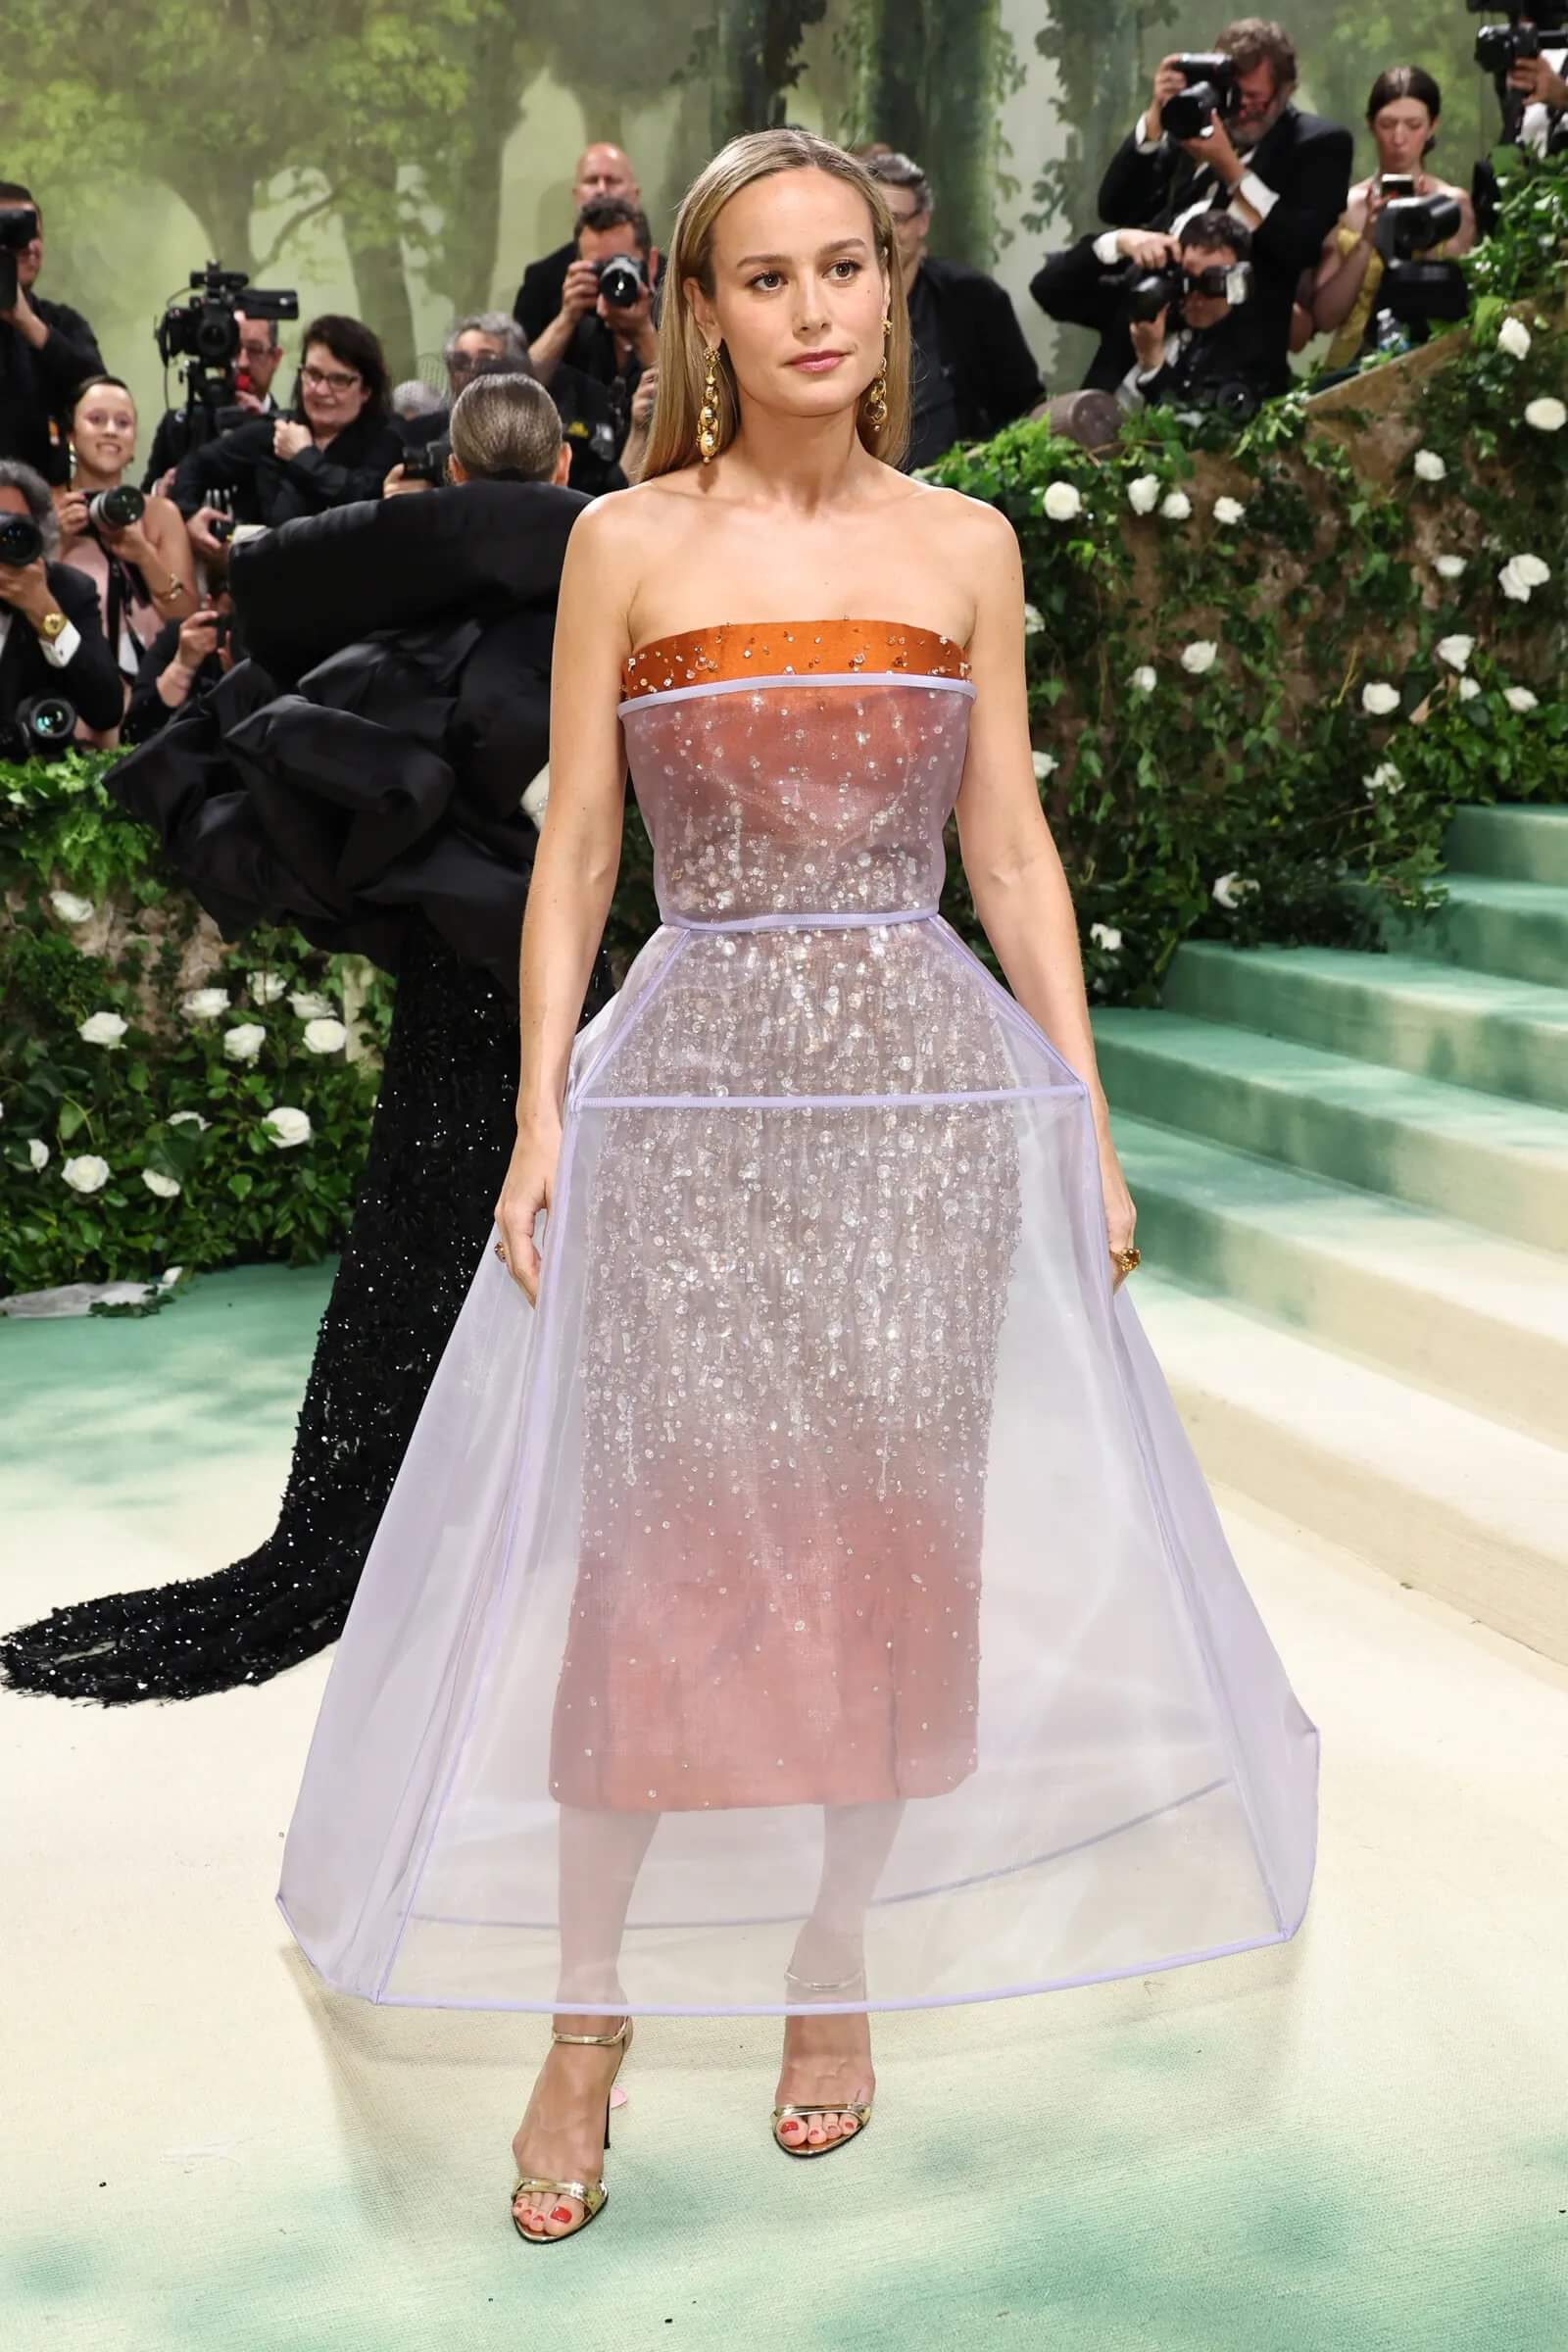 Brie Larson In Lavender Strapless Ball Gown